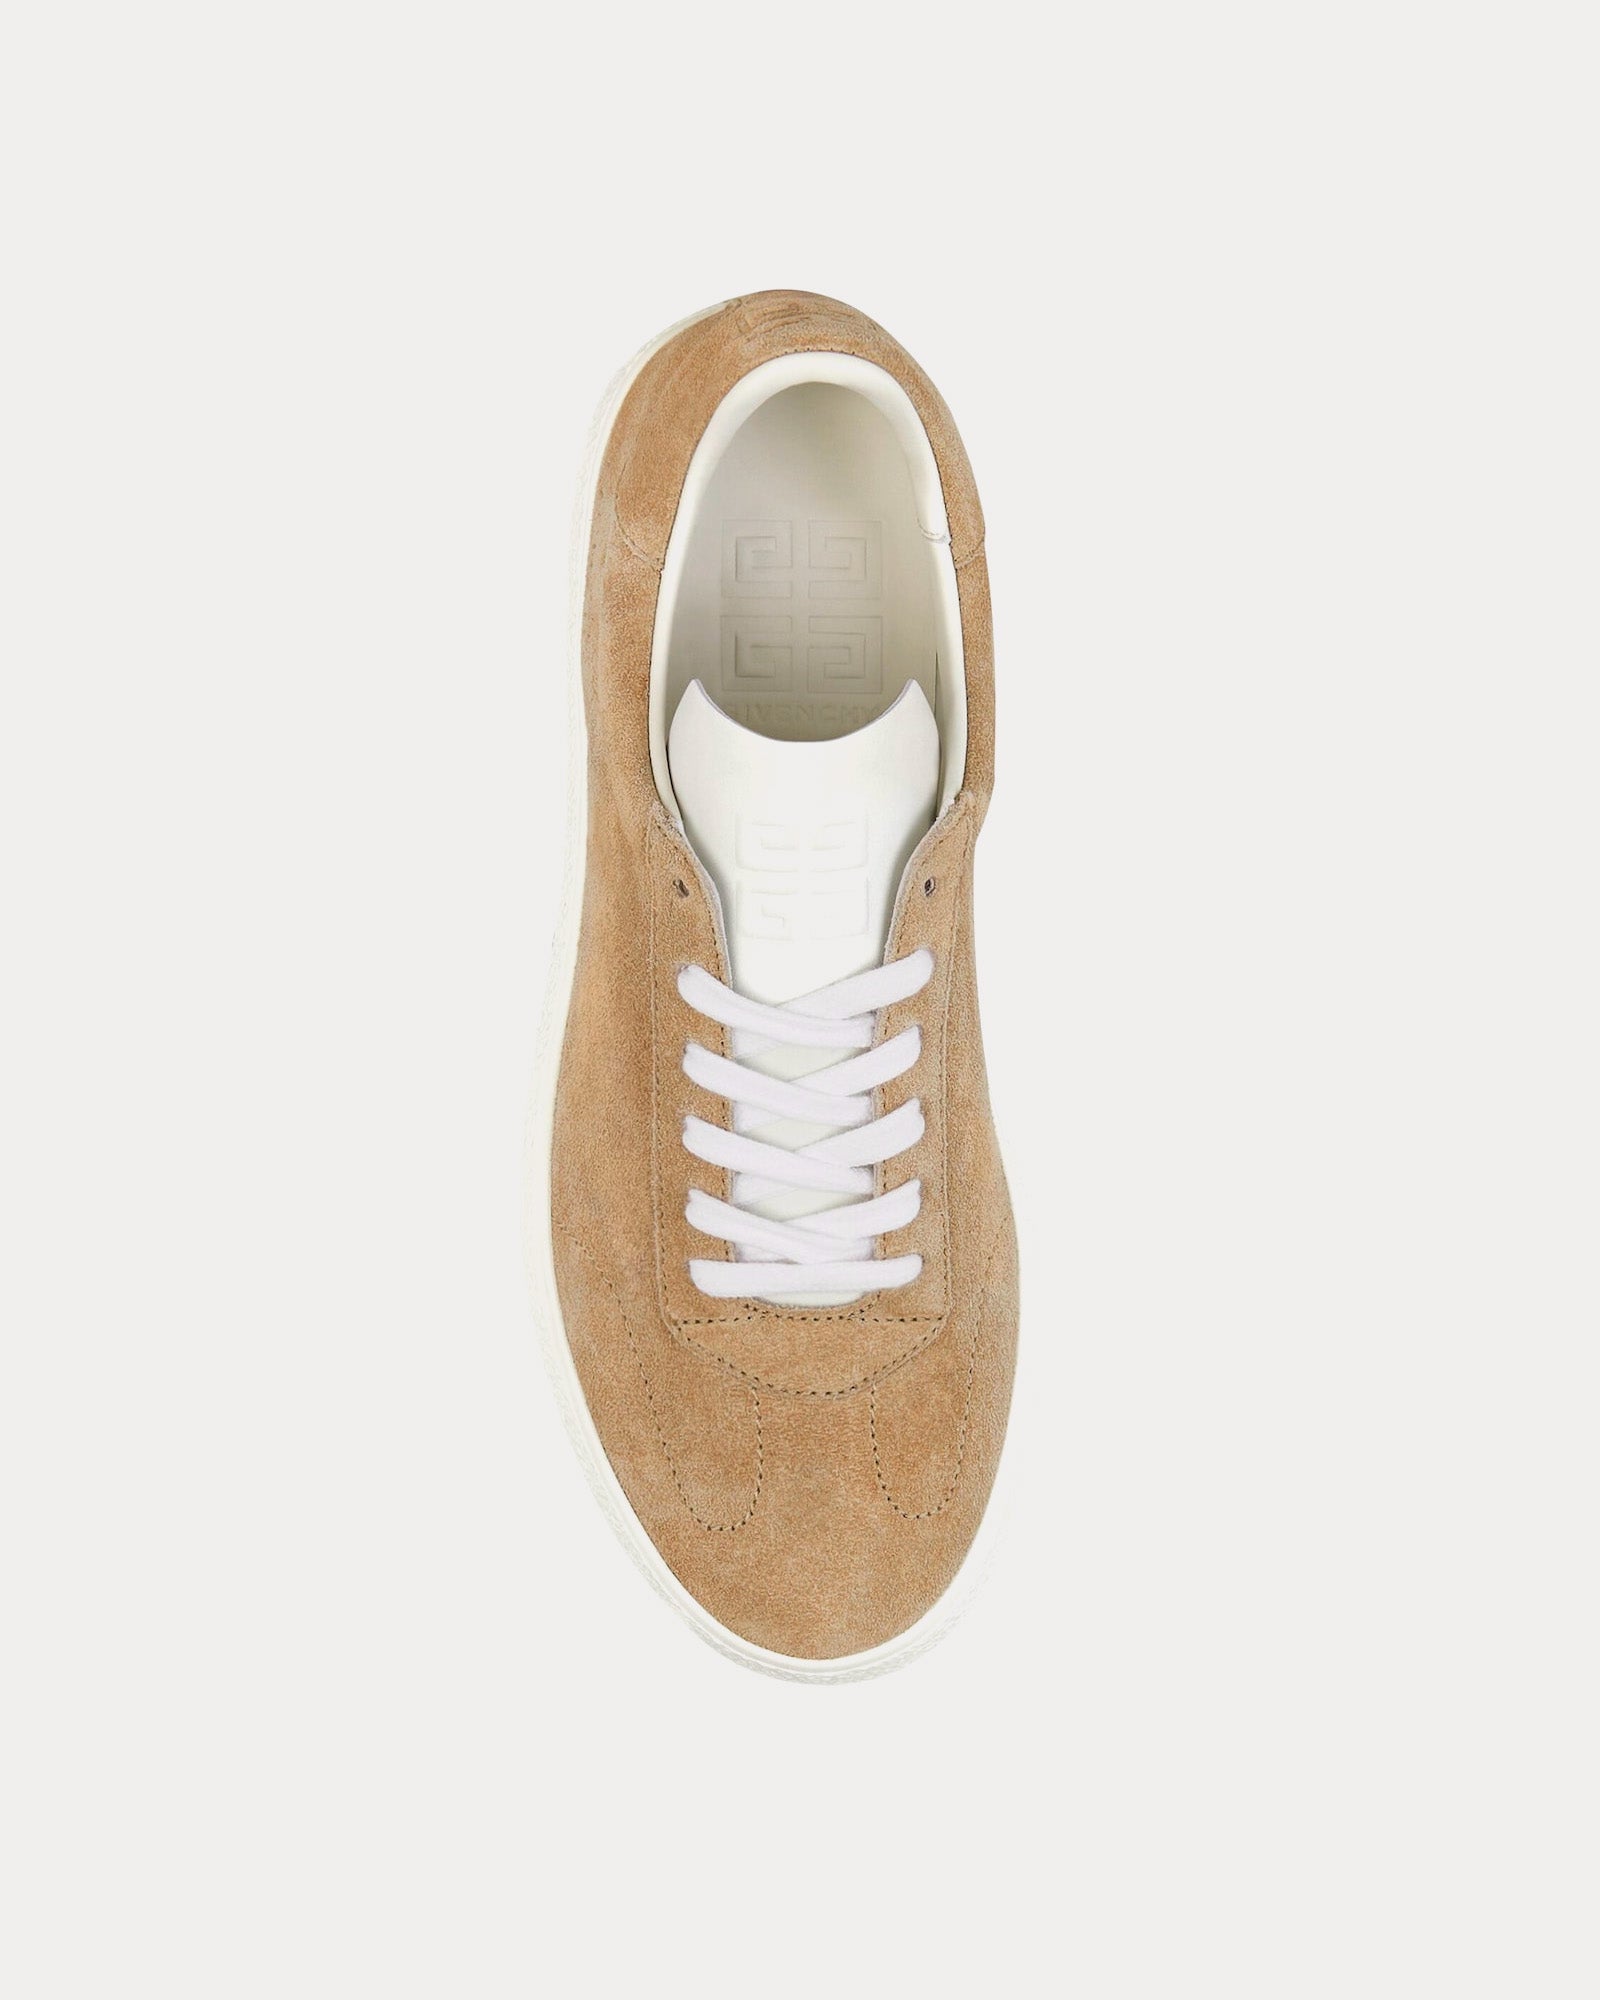 Givenchy - Town Suede Natural Beige Low Top Sneakers